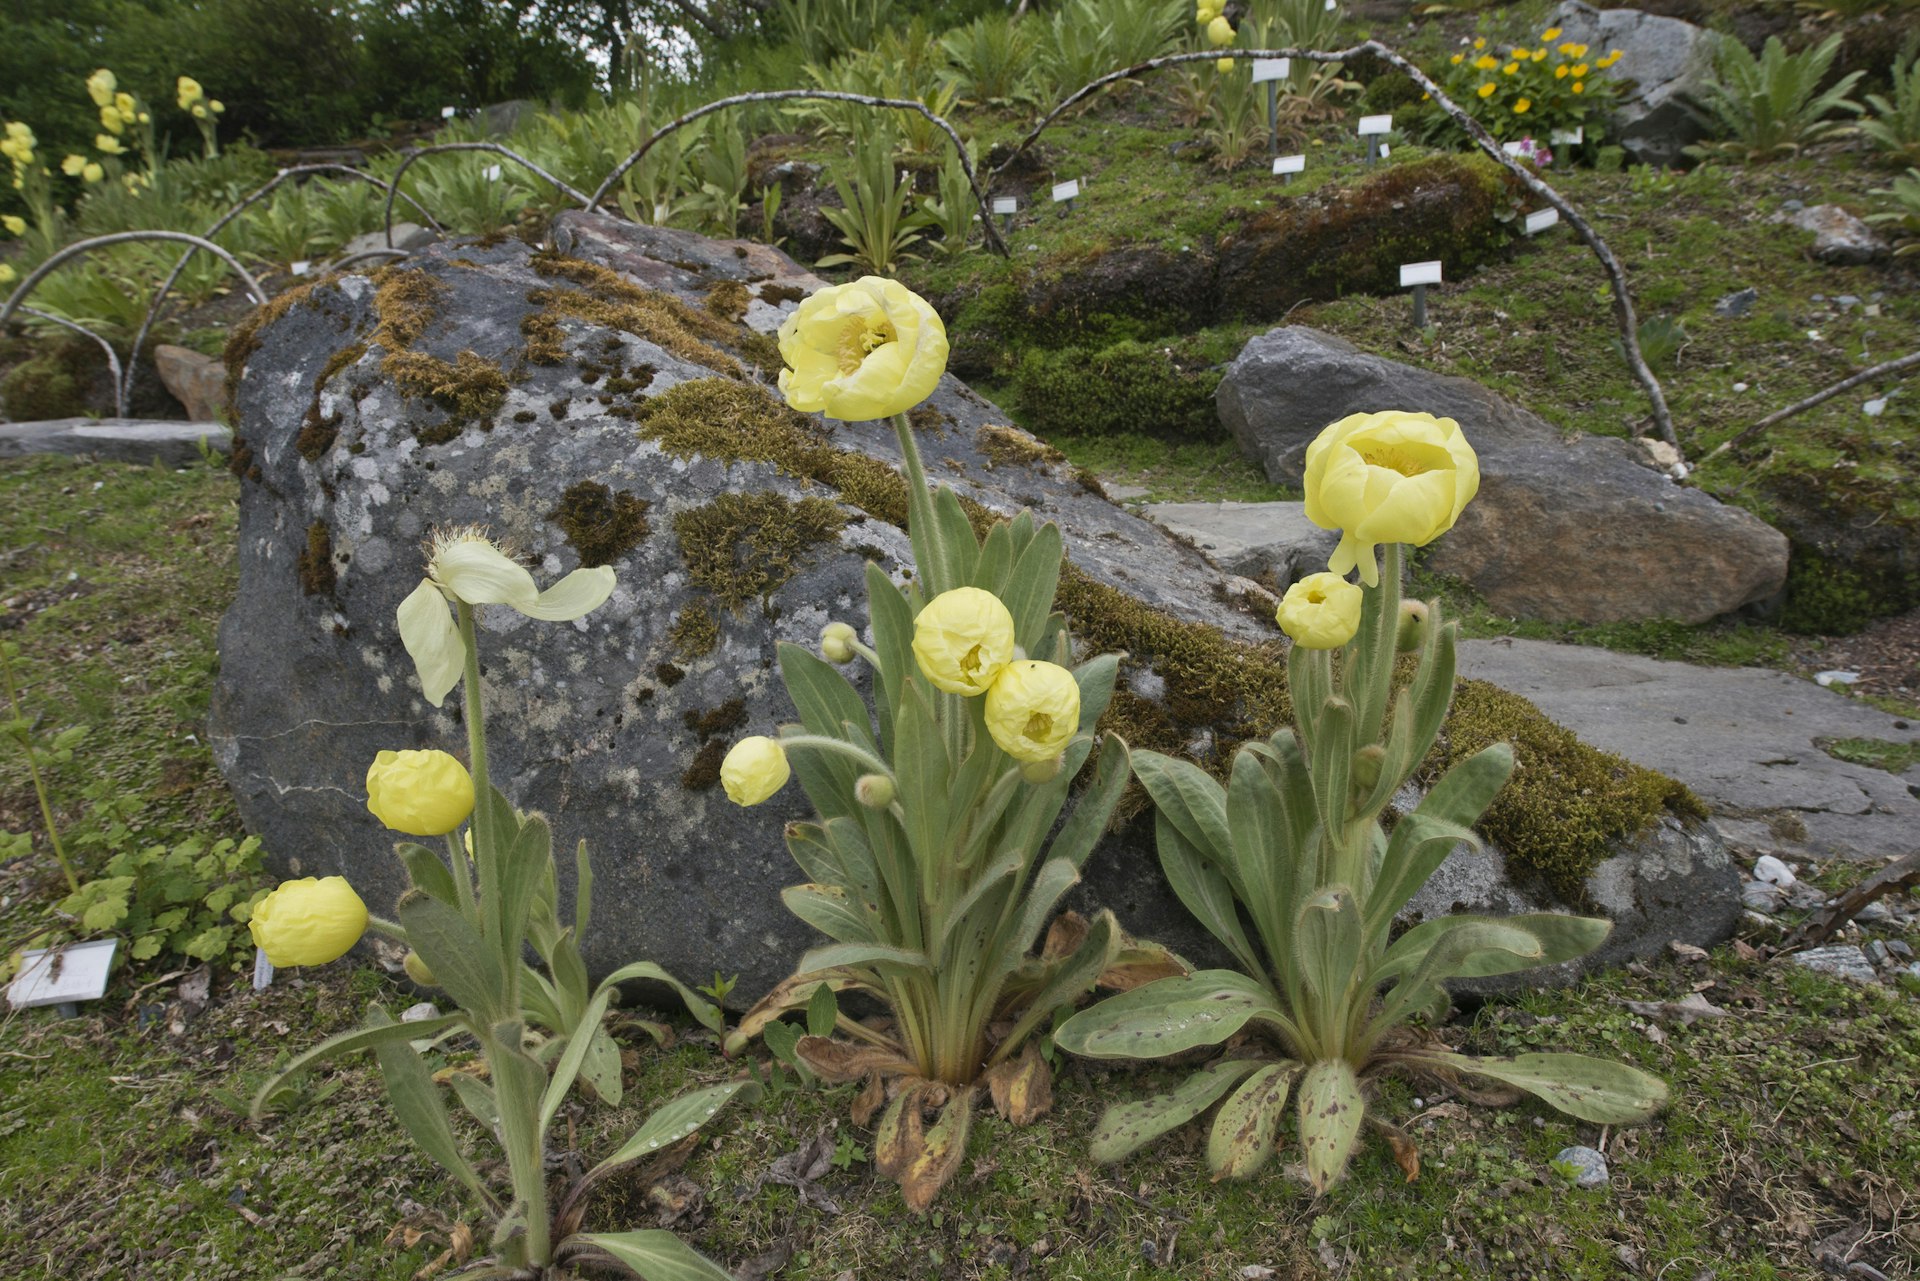 Rocky terrain in a high-altitude garden setting at Arctic–Alpine Botanic Garden, Norway, where bright yellow poppies (Meconopsis integrifolia)bloom against the moss-covered stones. Various alpine plants fill the garden, and small labels provide information about the species. The overcast sky suggests a cool, moist climate typical of mountainous regions